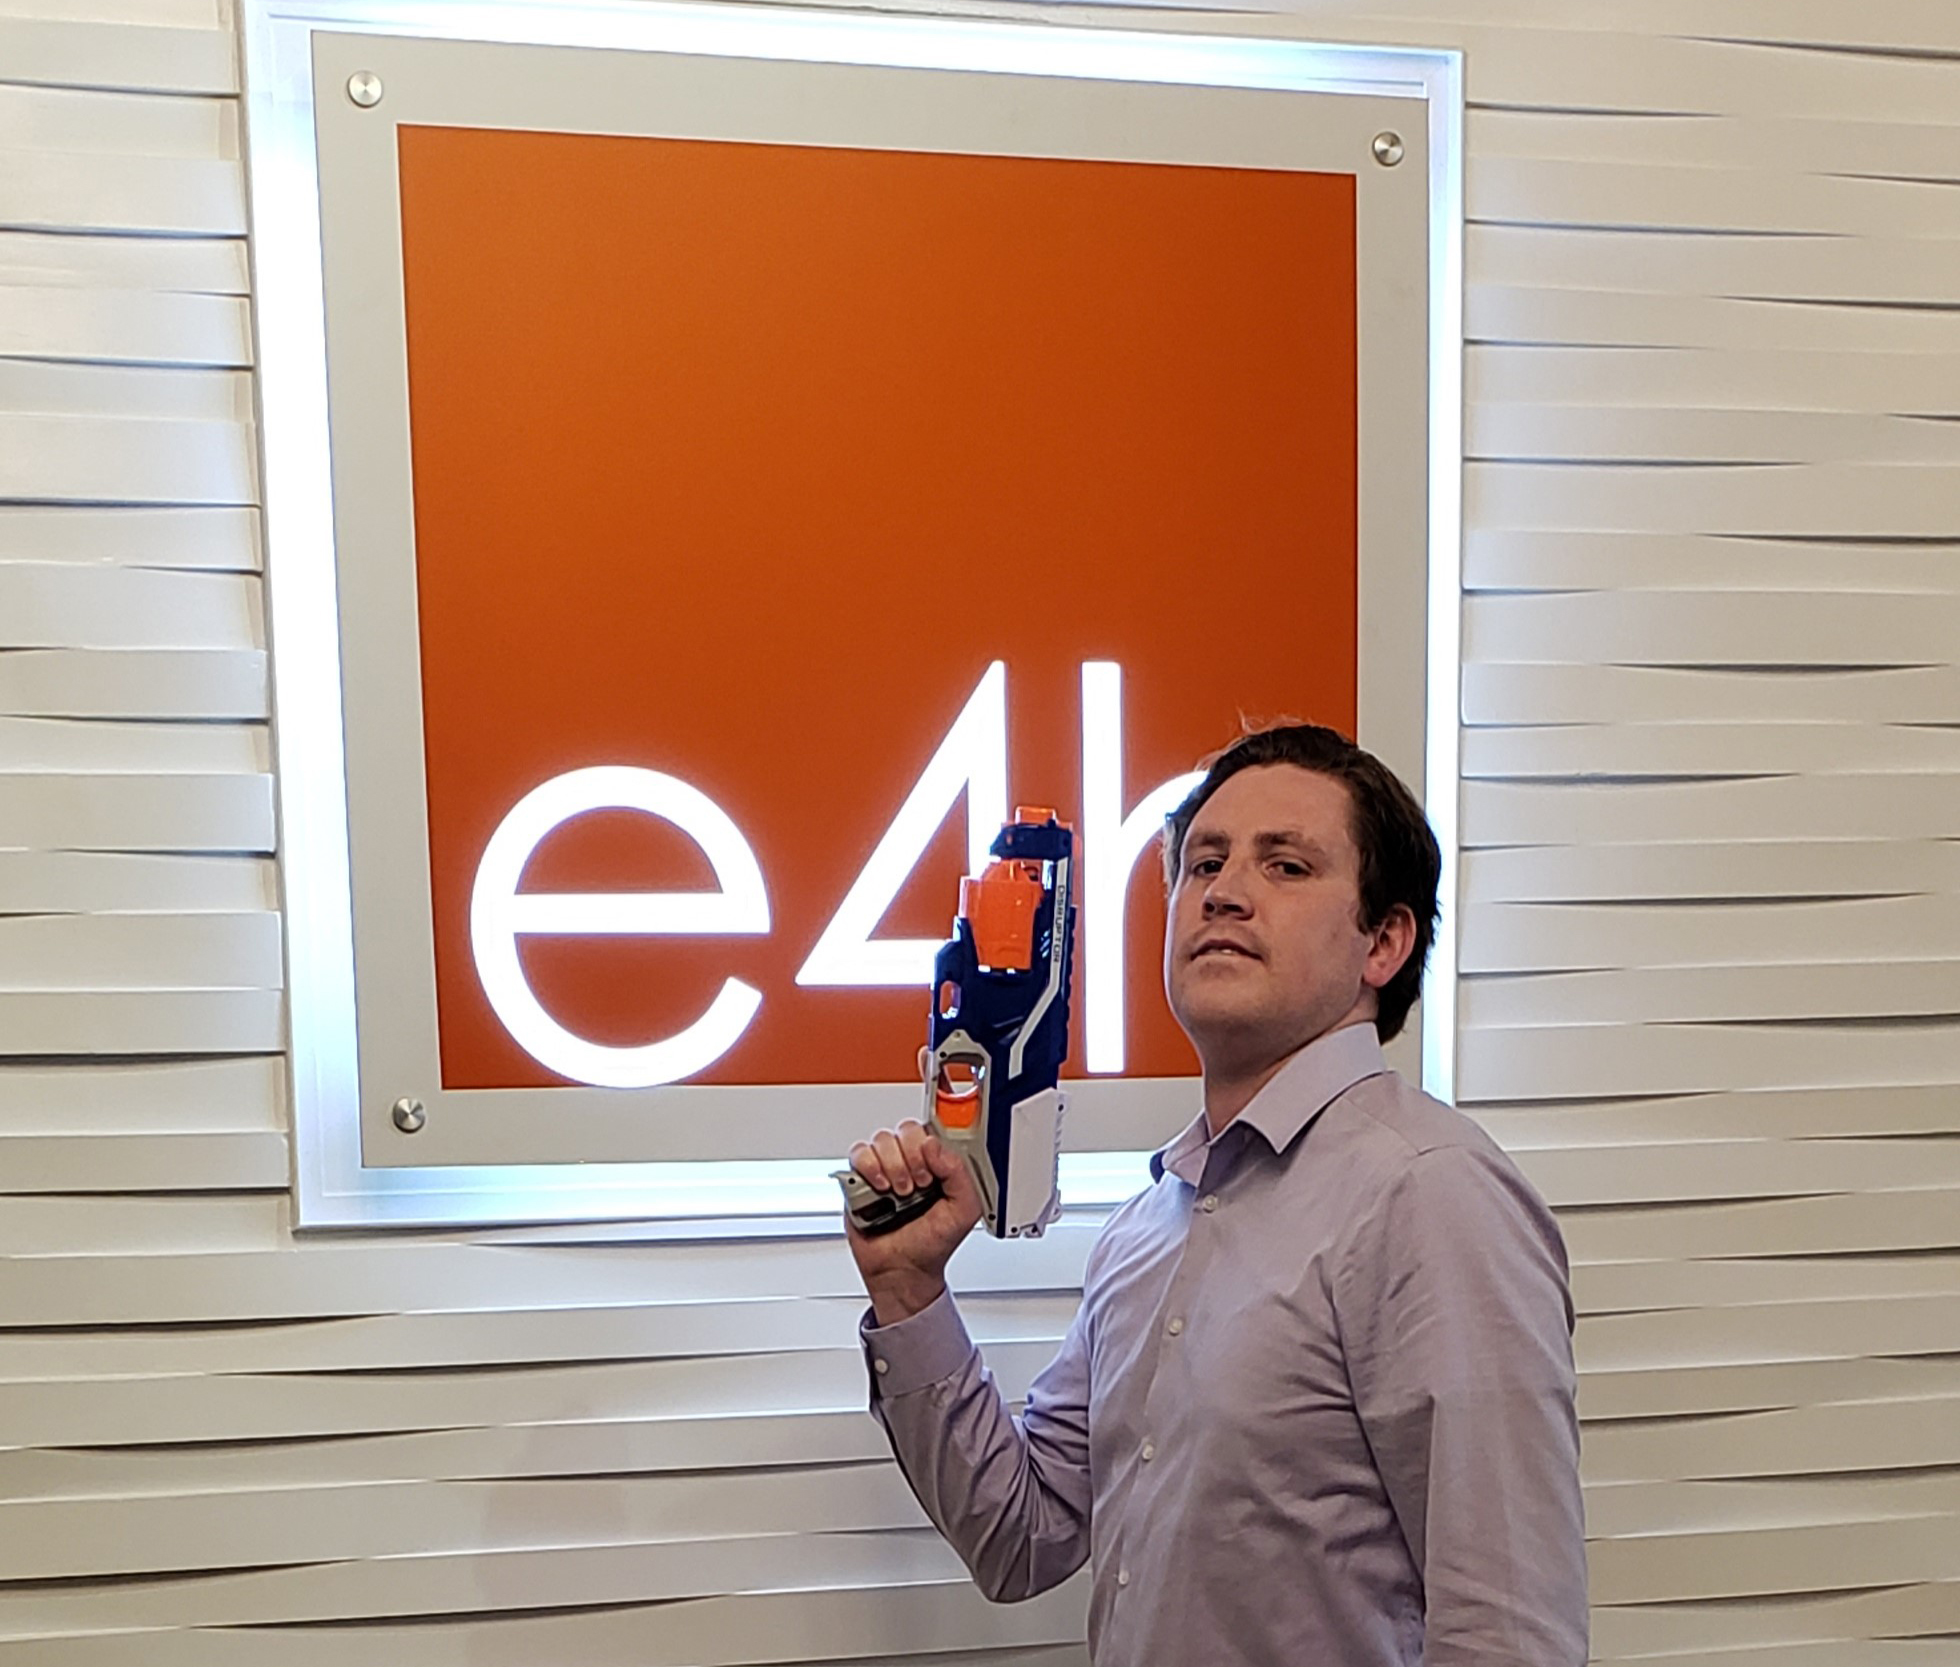 An intern poses with a Nerf gun in front of an E4H sign